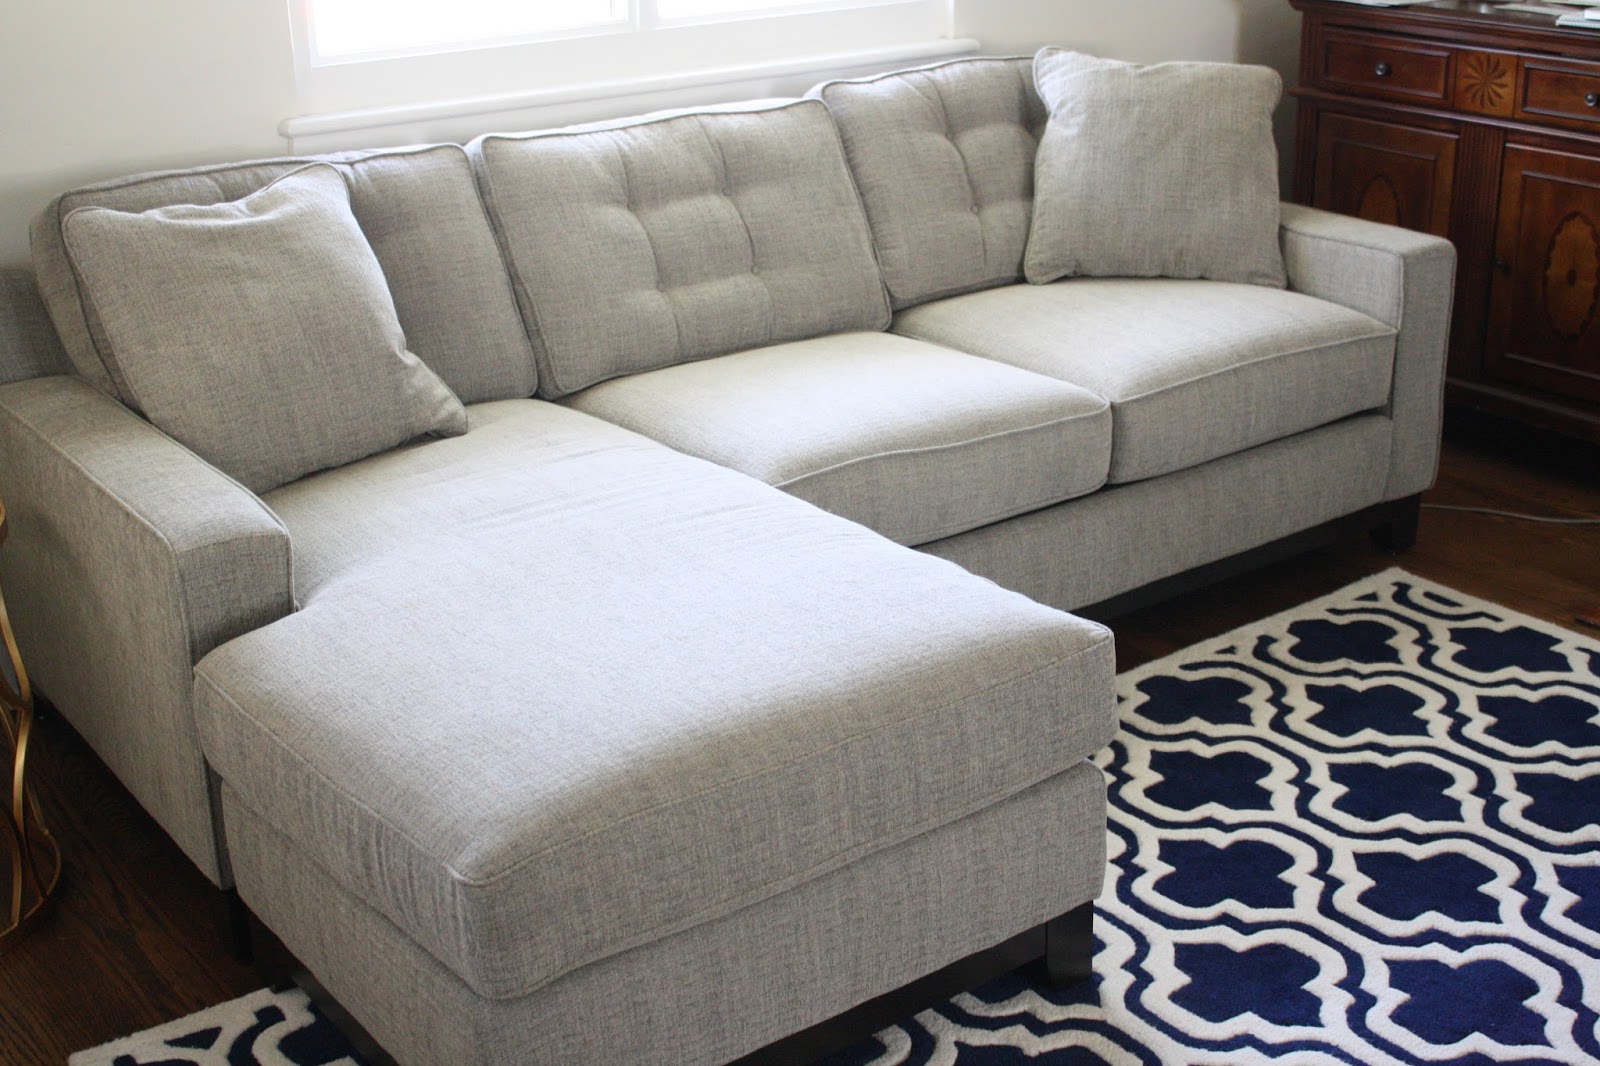 Aly s Bloggity Blog New Couch 